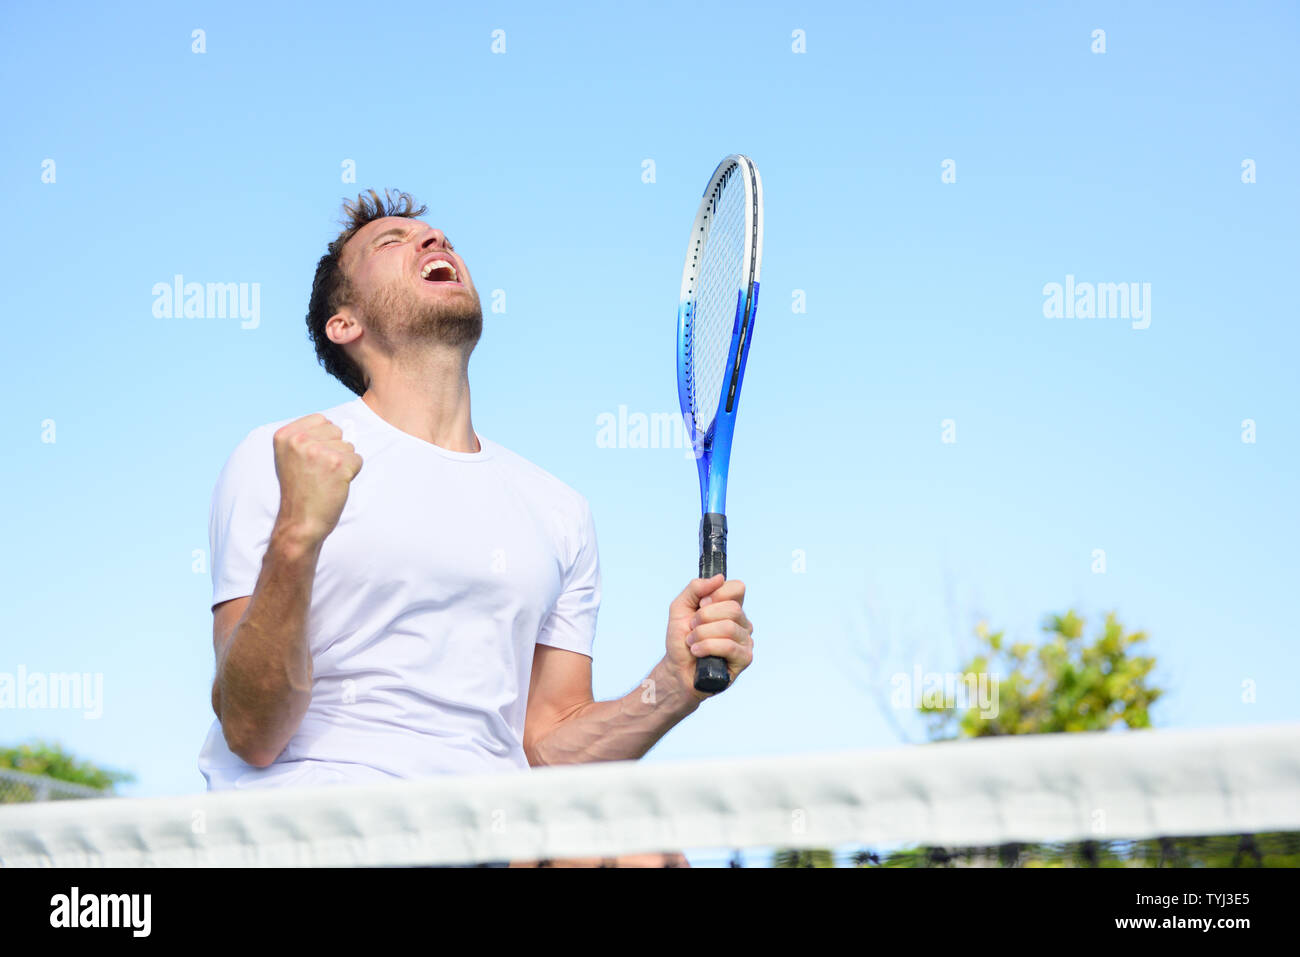 Tennis player man winning cheering celebrating victory. Winner man happy in  celebration of success and win. Fit male athlete on tennis court outdoors  holding tennis racket in triumph by the net Stock